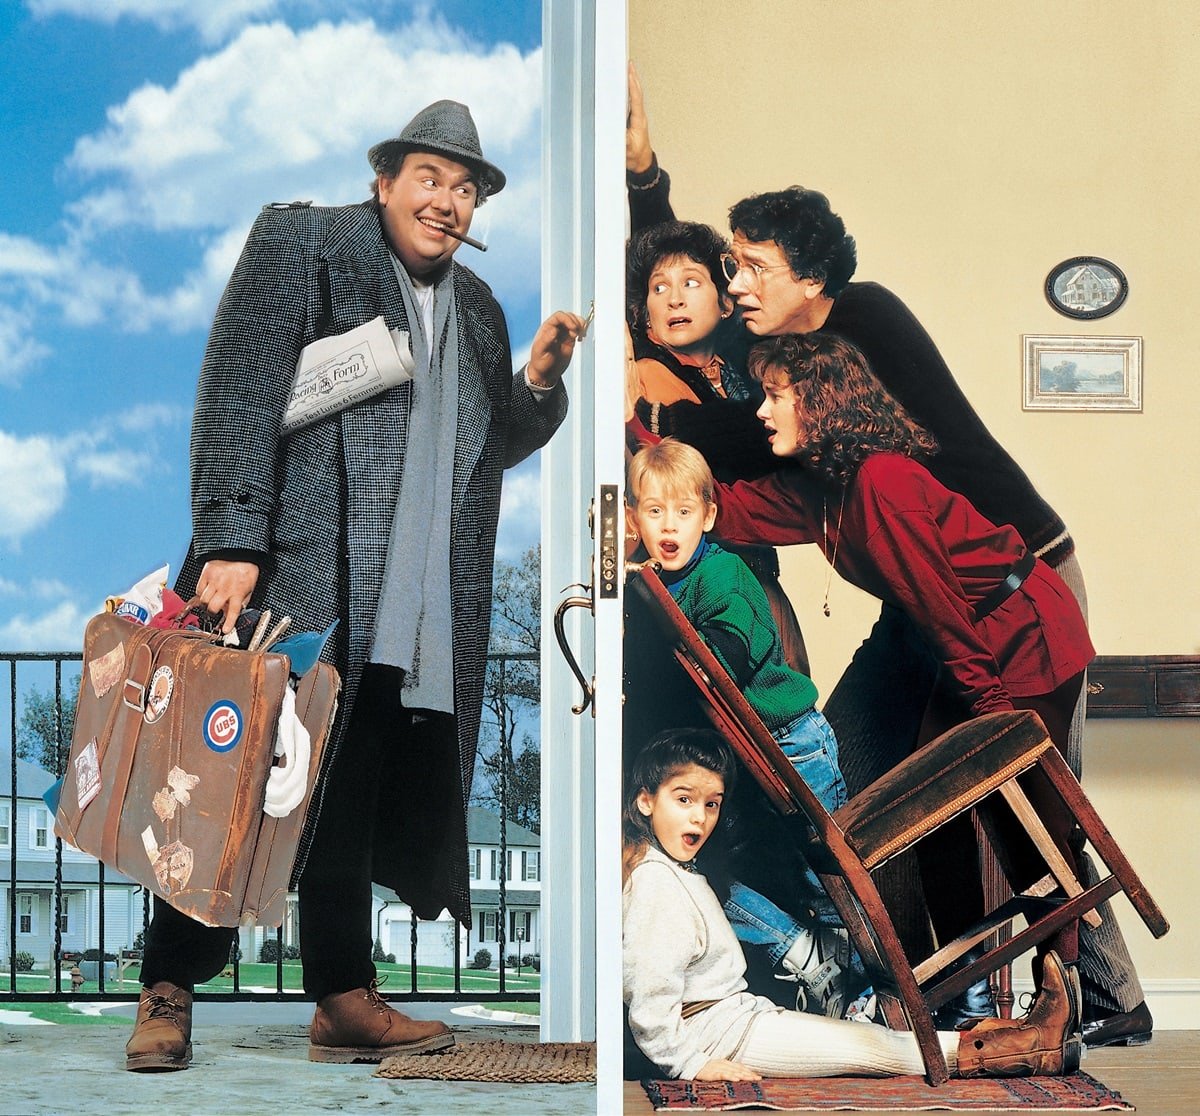 In the 1989 movie "Uncle Buck", John Candy played the title character, Buck Russell, while Macaulay Culkin played his nephew, Miles Russell, and Gaby Hoffmann played his niece, Maizy Russell. Jean Louisa Kelly played the character of Tia Russell, the eldest daughter of the family, while Garrett M. Brown and Elaine Bromka played Bob and Cindy Russell, the parents of the children Buck is babysitting